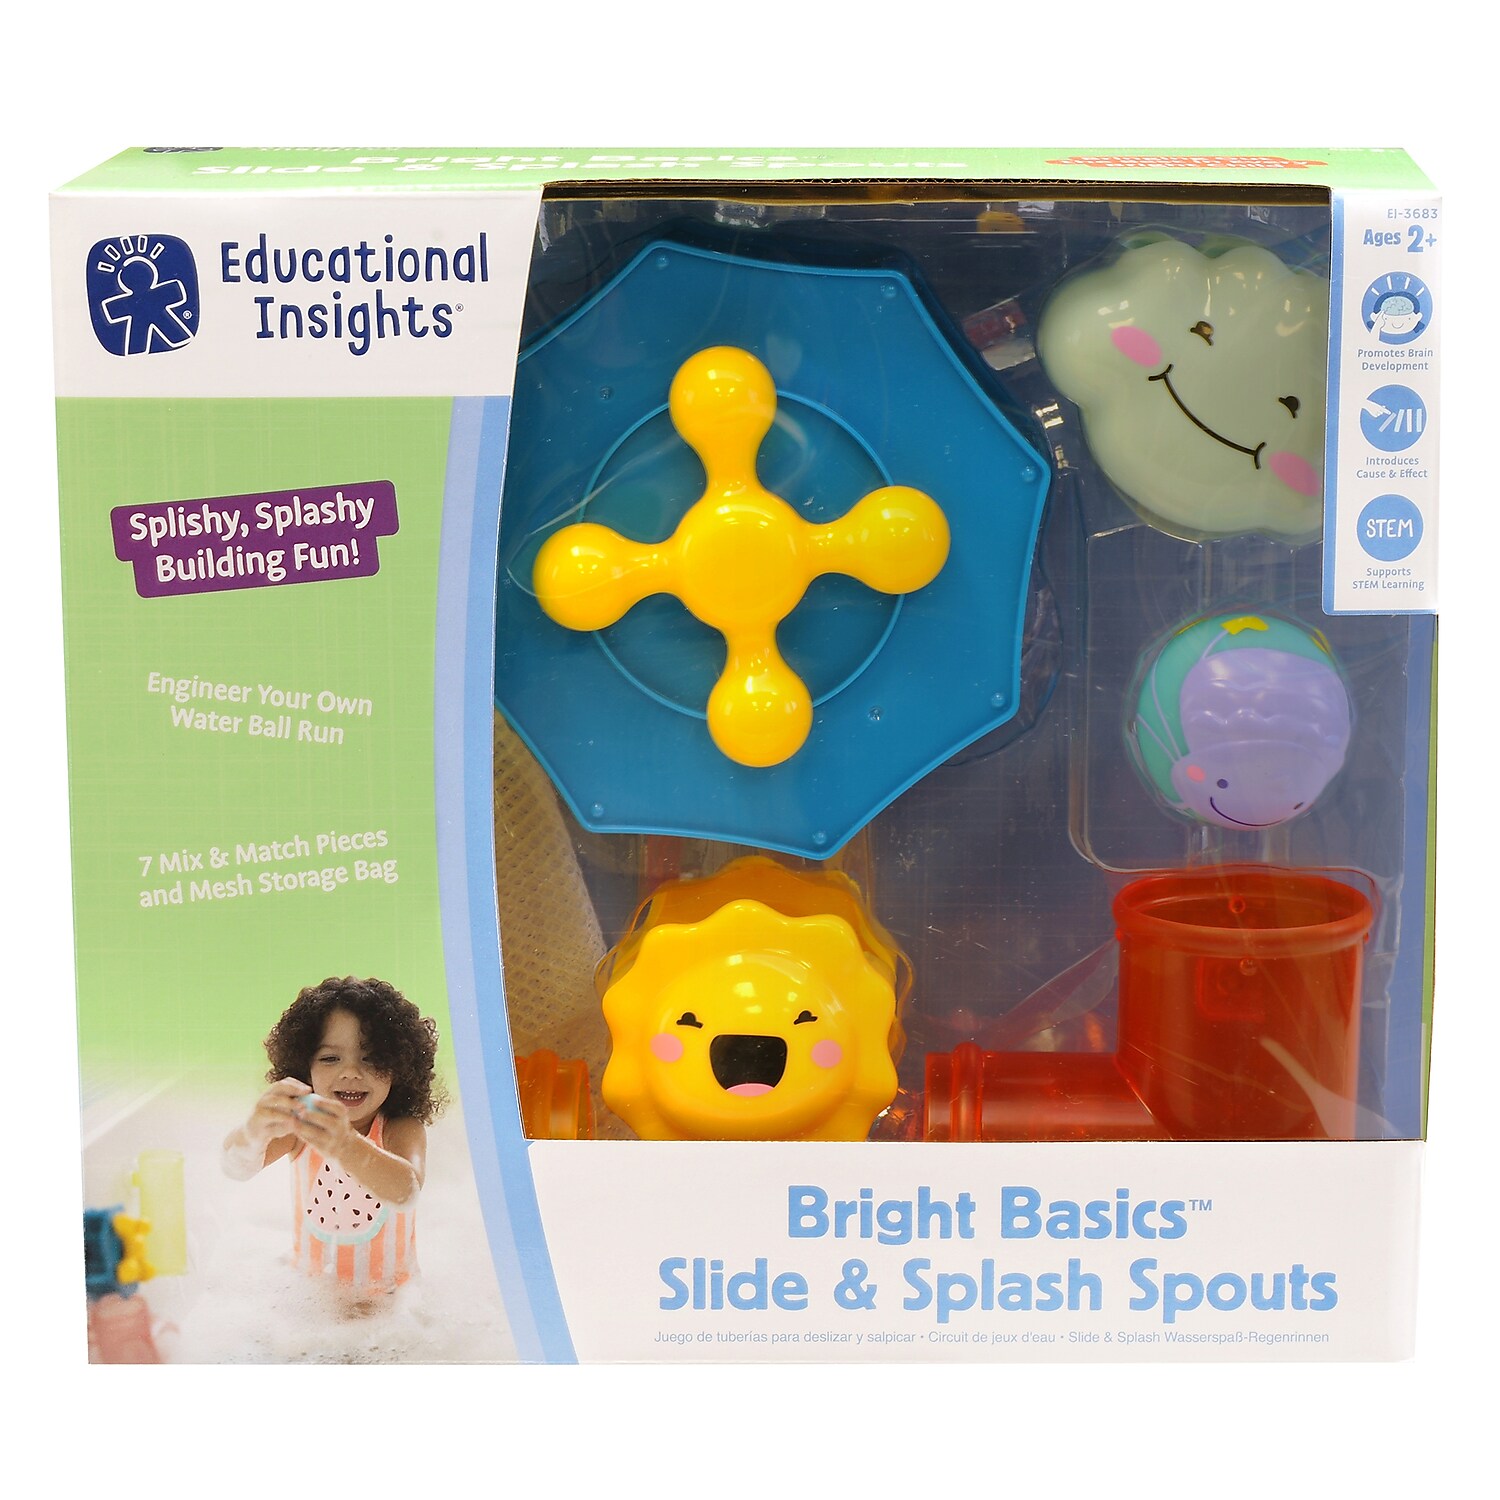 Educational Insights Bright Basics Slide & Splash Spouts: Bath Toy For Toddlers - image 1 of 6